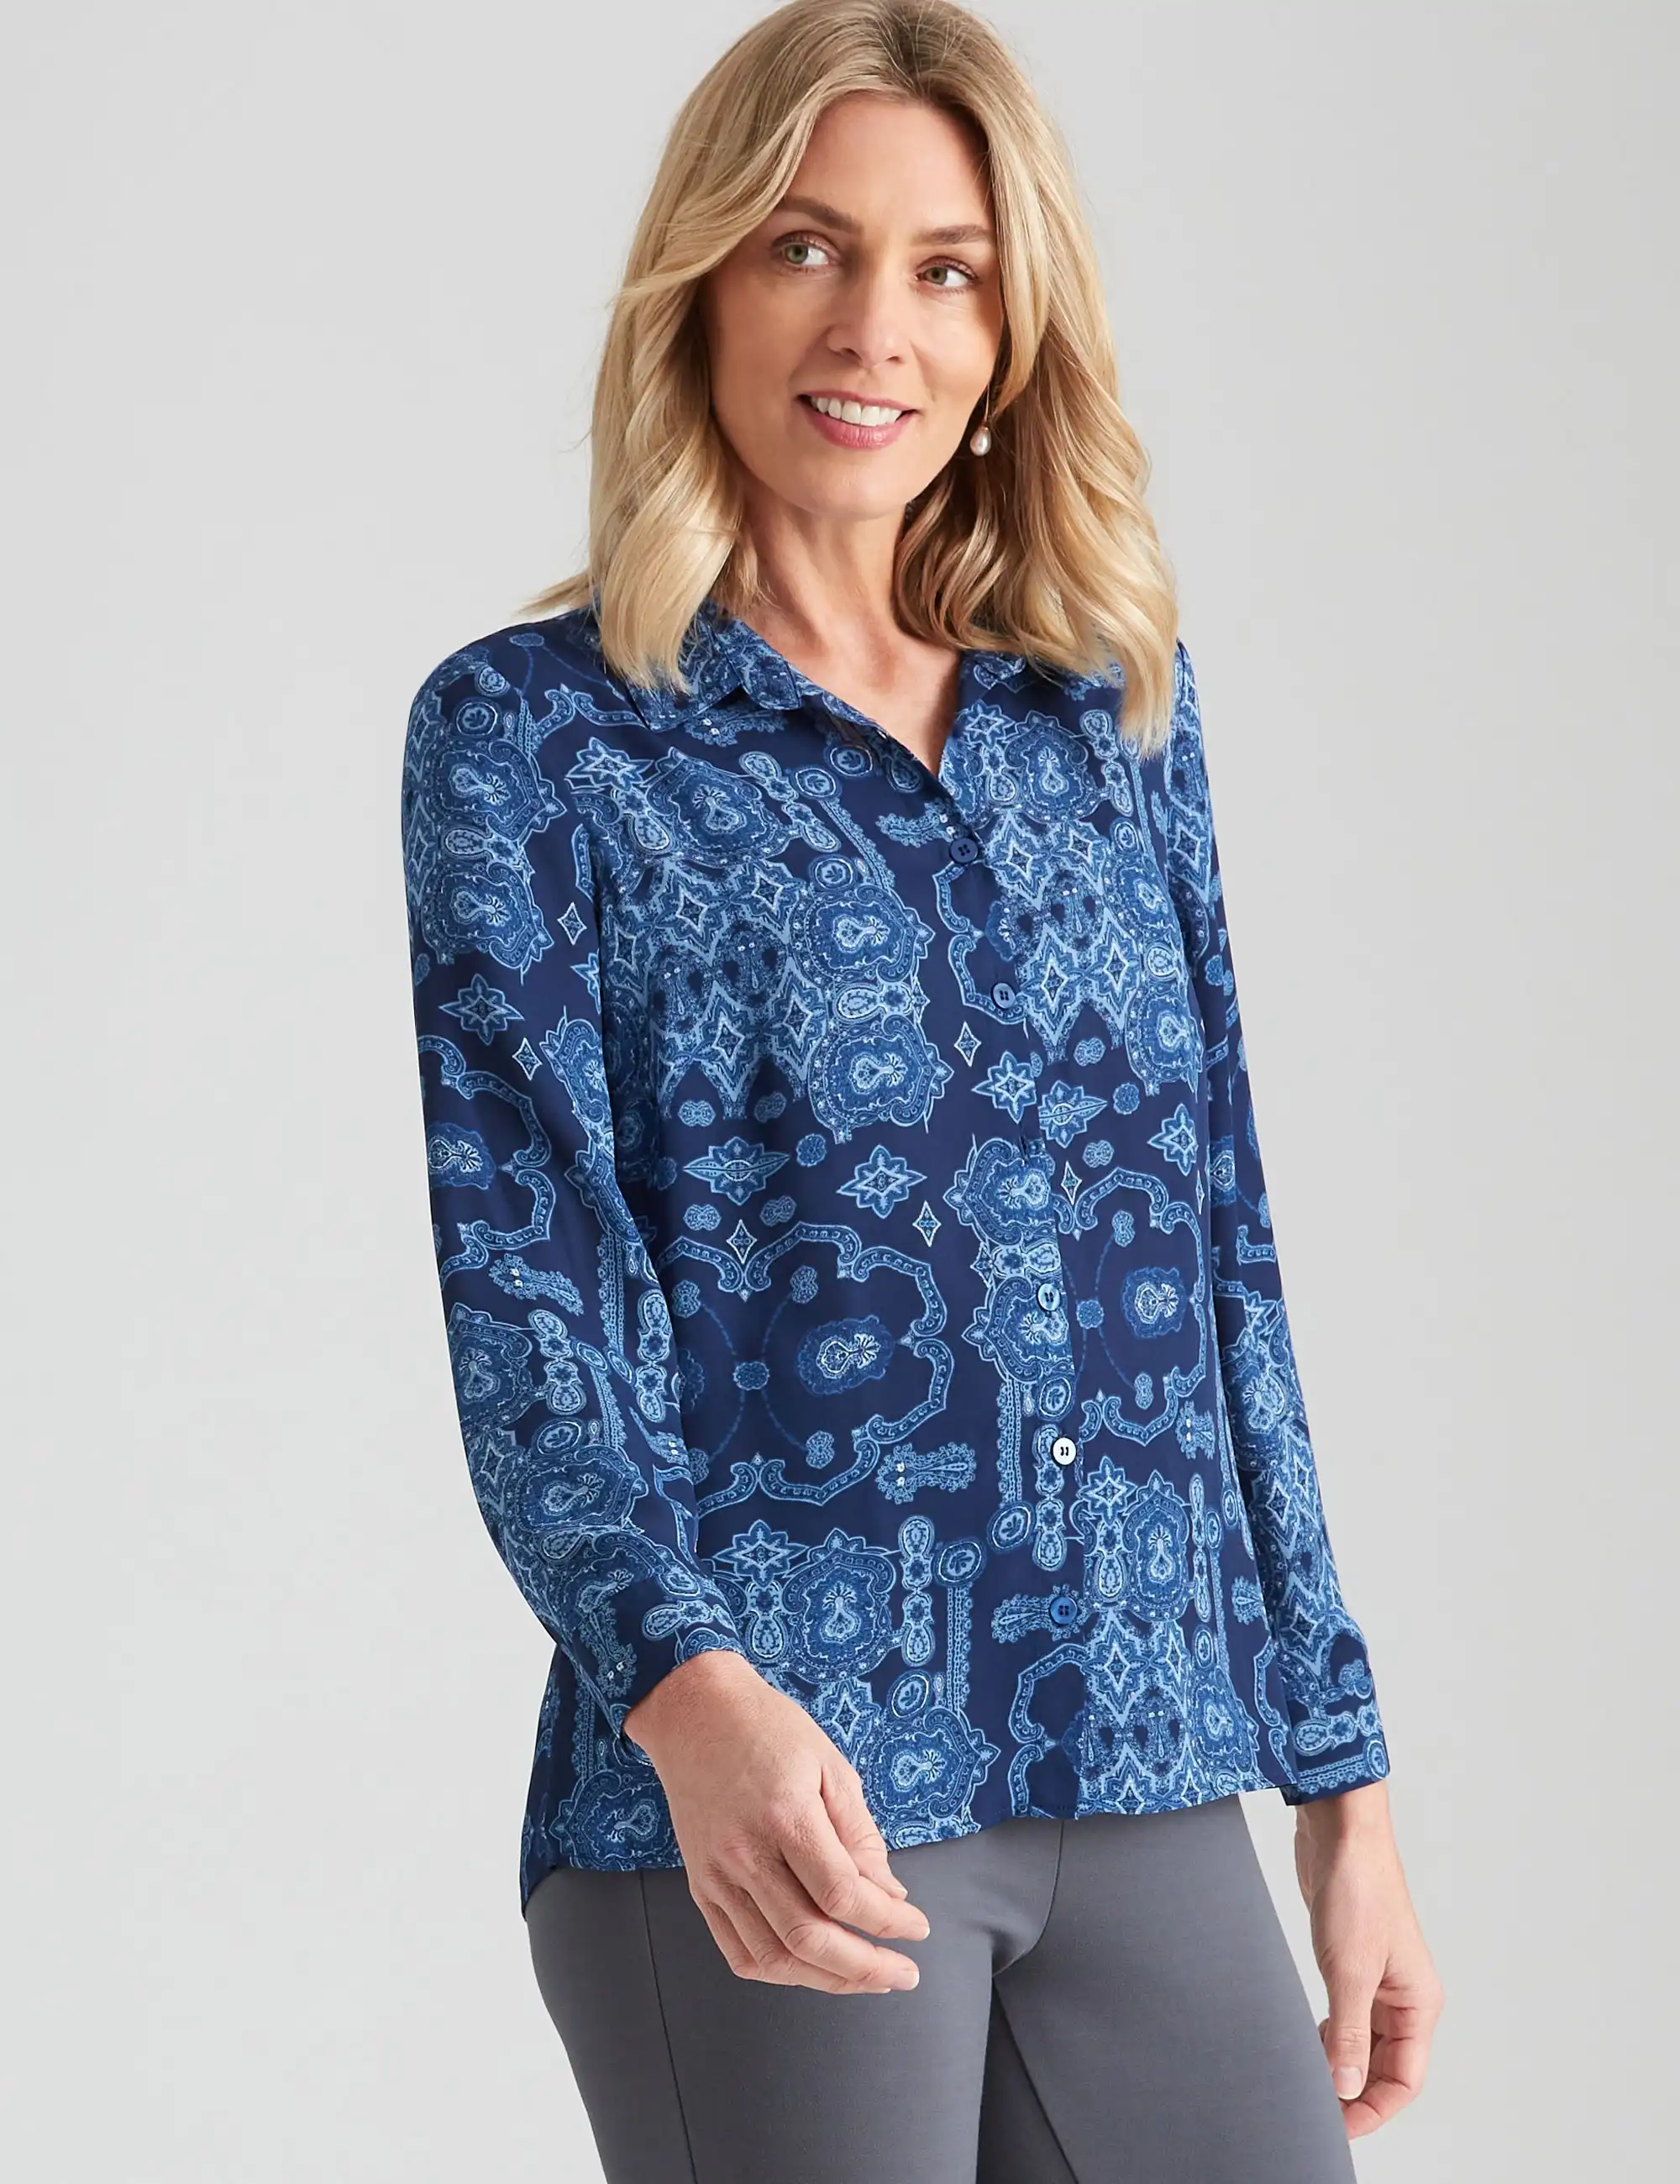 Noni B Crossover Front Shirt